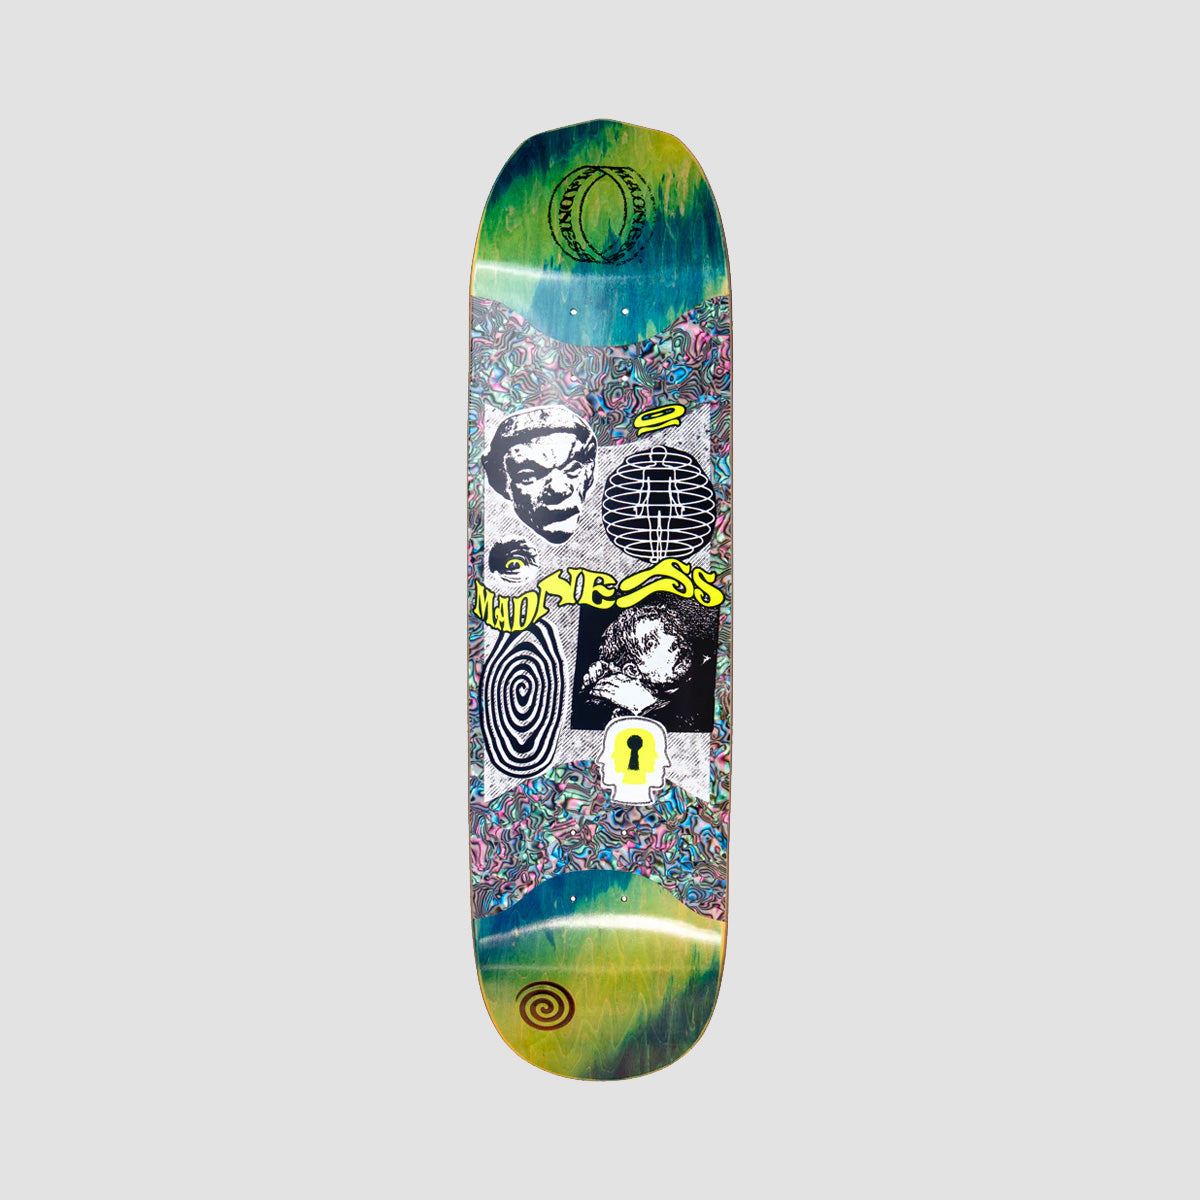 Madness Outcast R7 Slick On Middle Section Burden Shaped Skateboard Deck Green/Multi - 8.5"